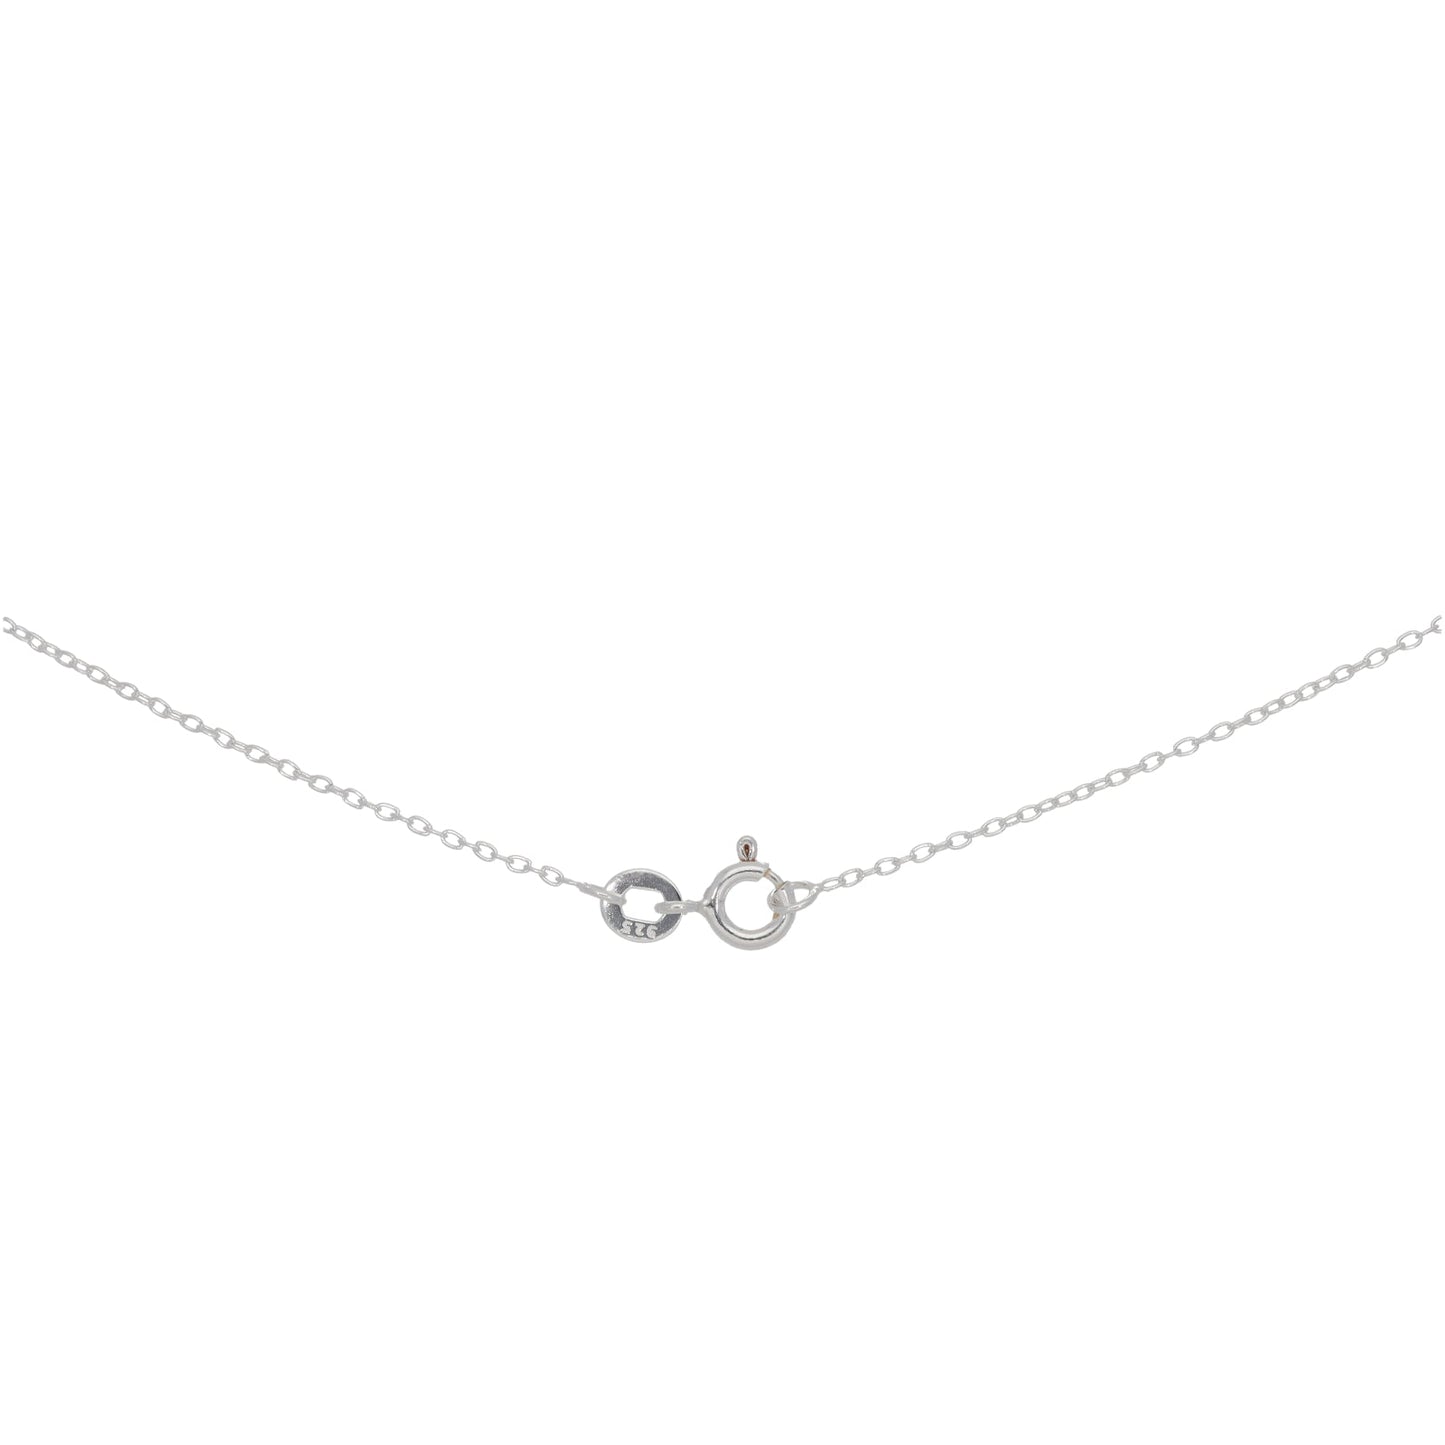 Silver Sterling Double Heart Necklace 16"